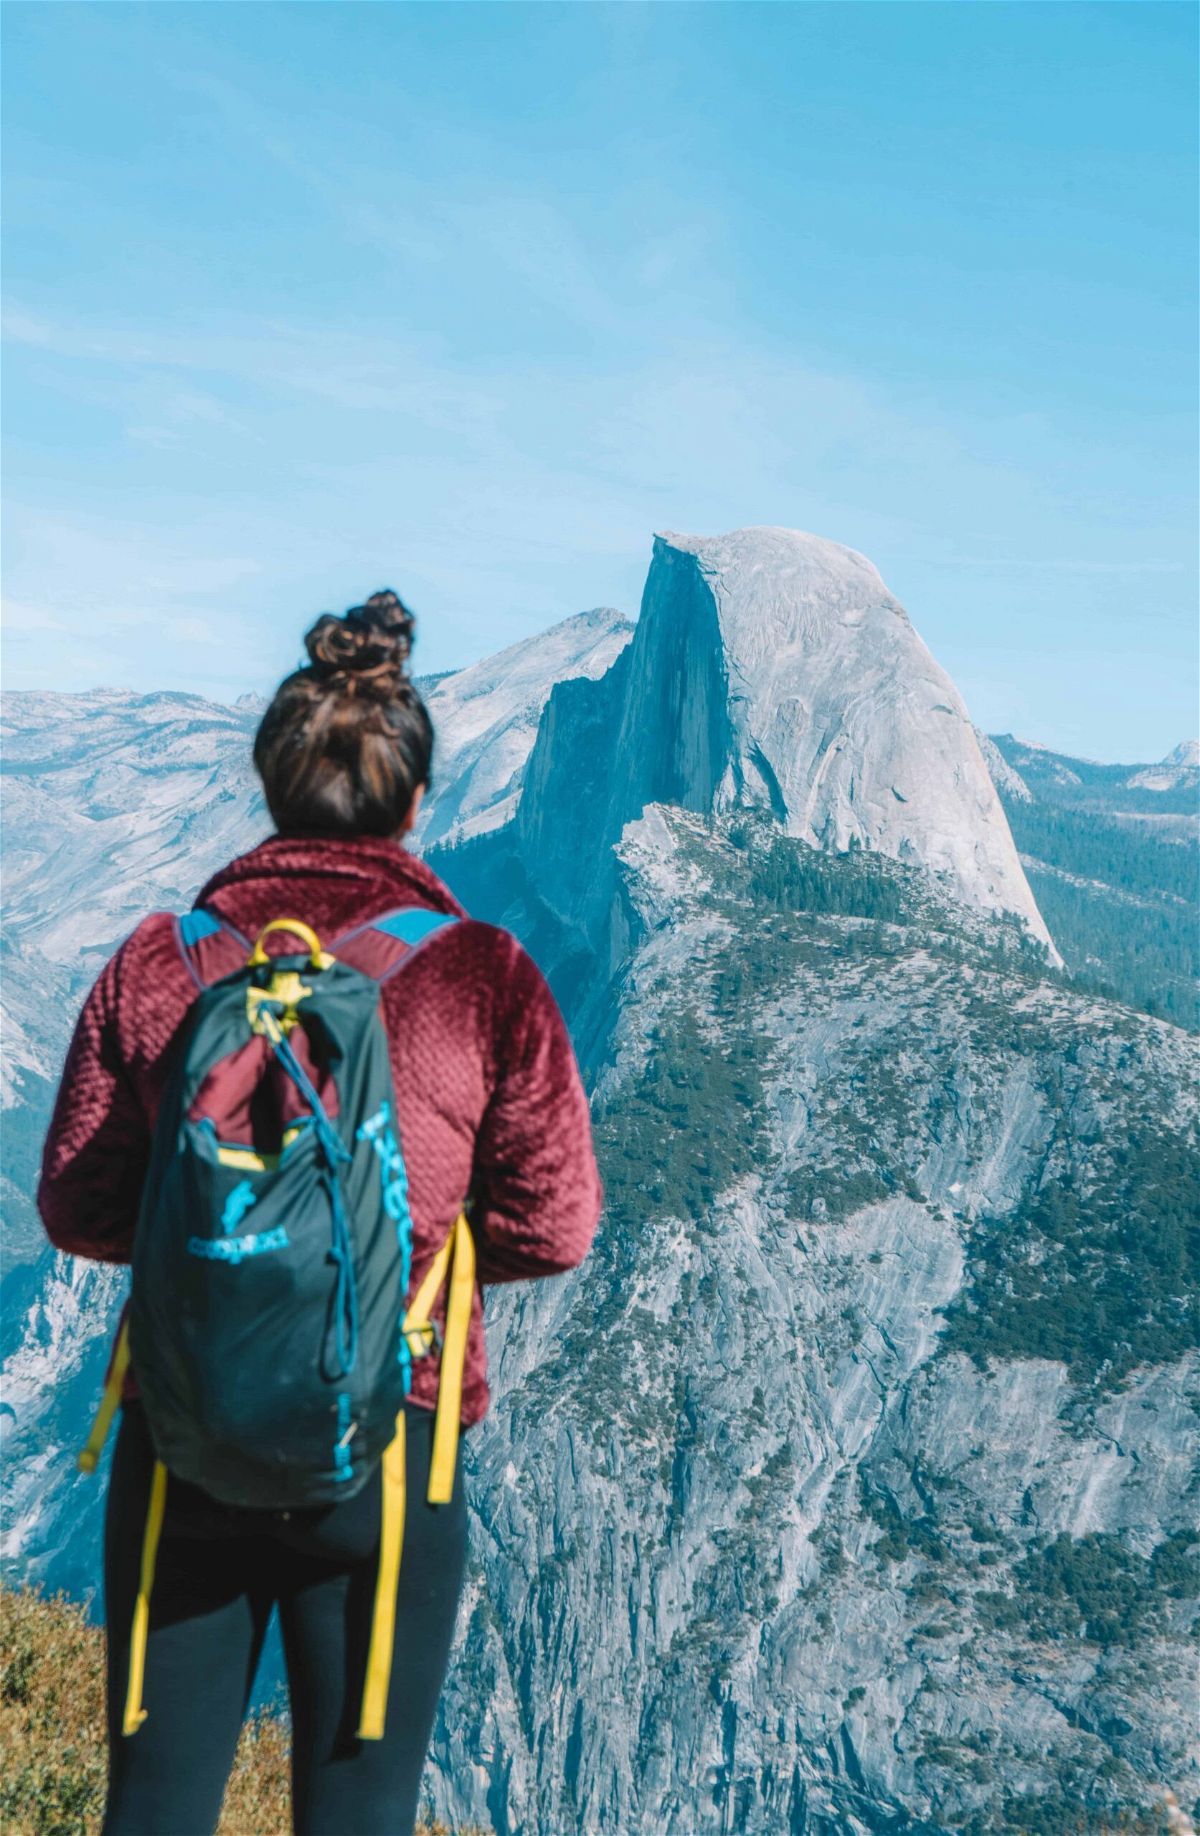 A woman in a burgundy jacket looks out at Half Dome in Yosemite.